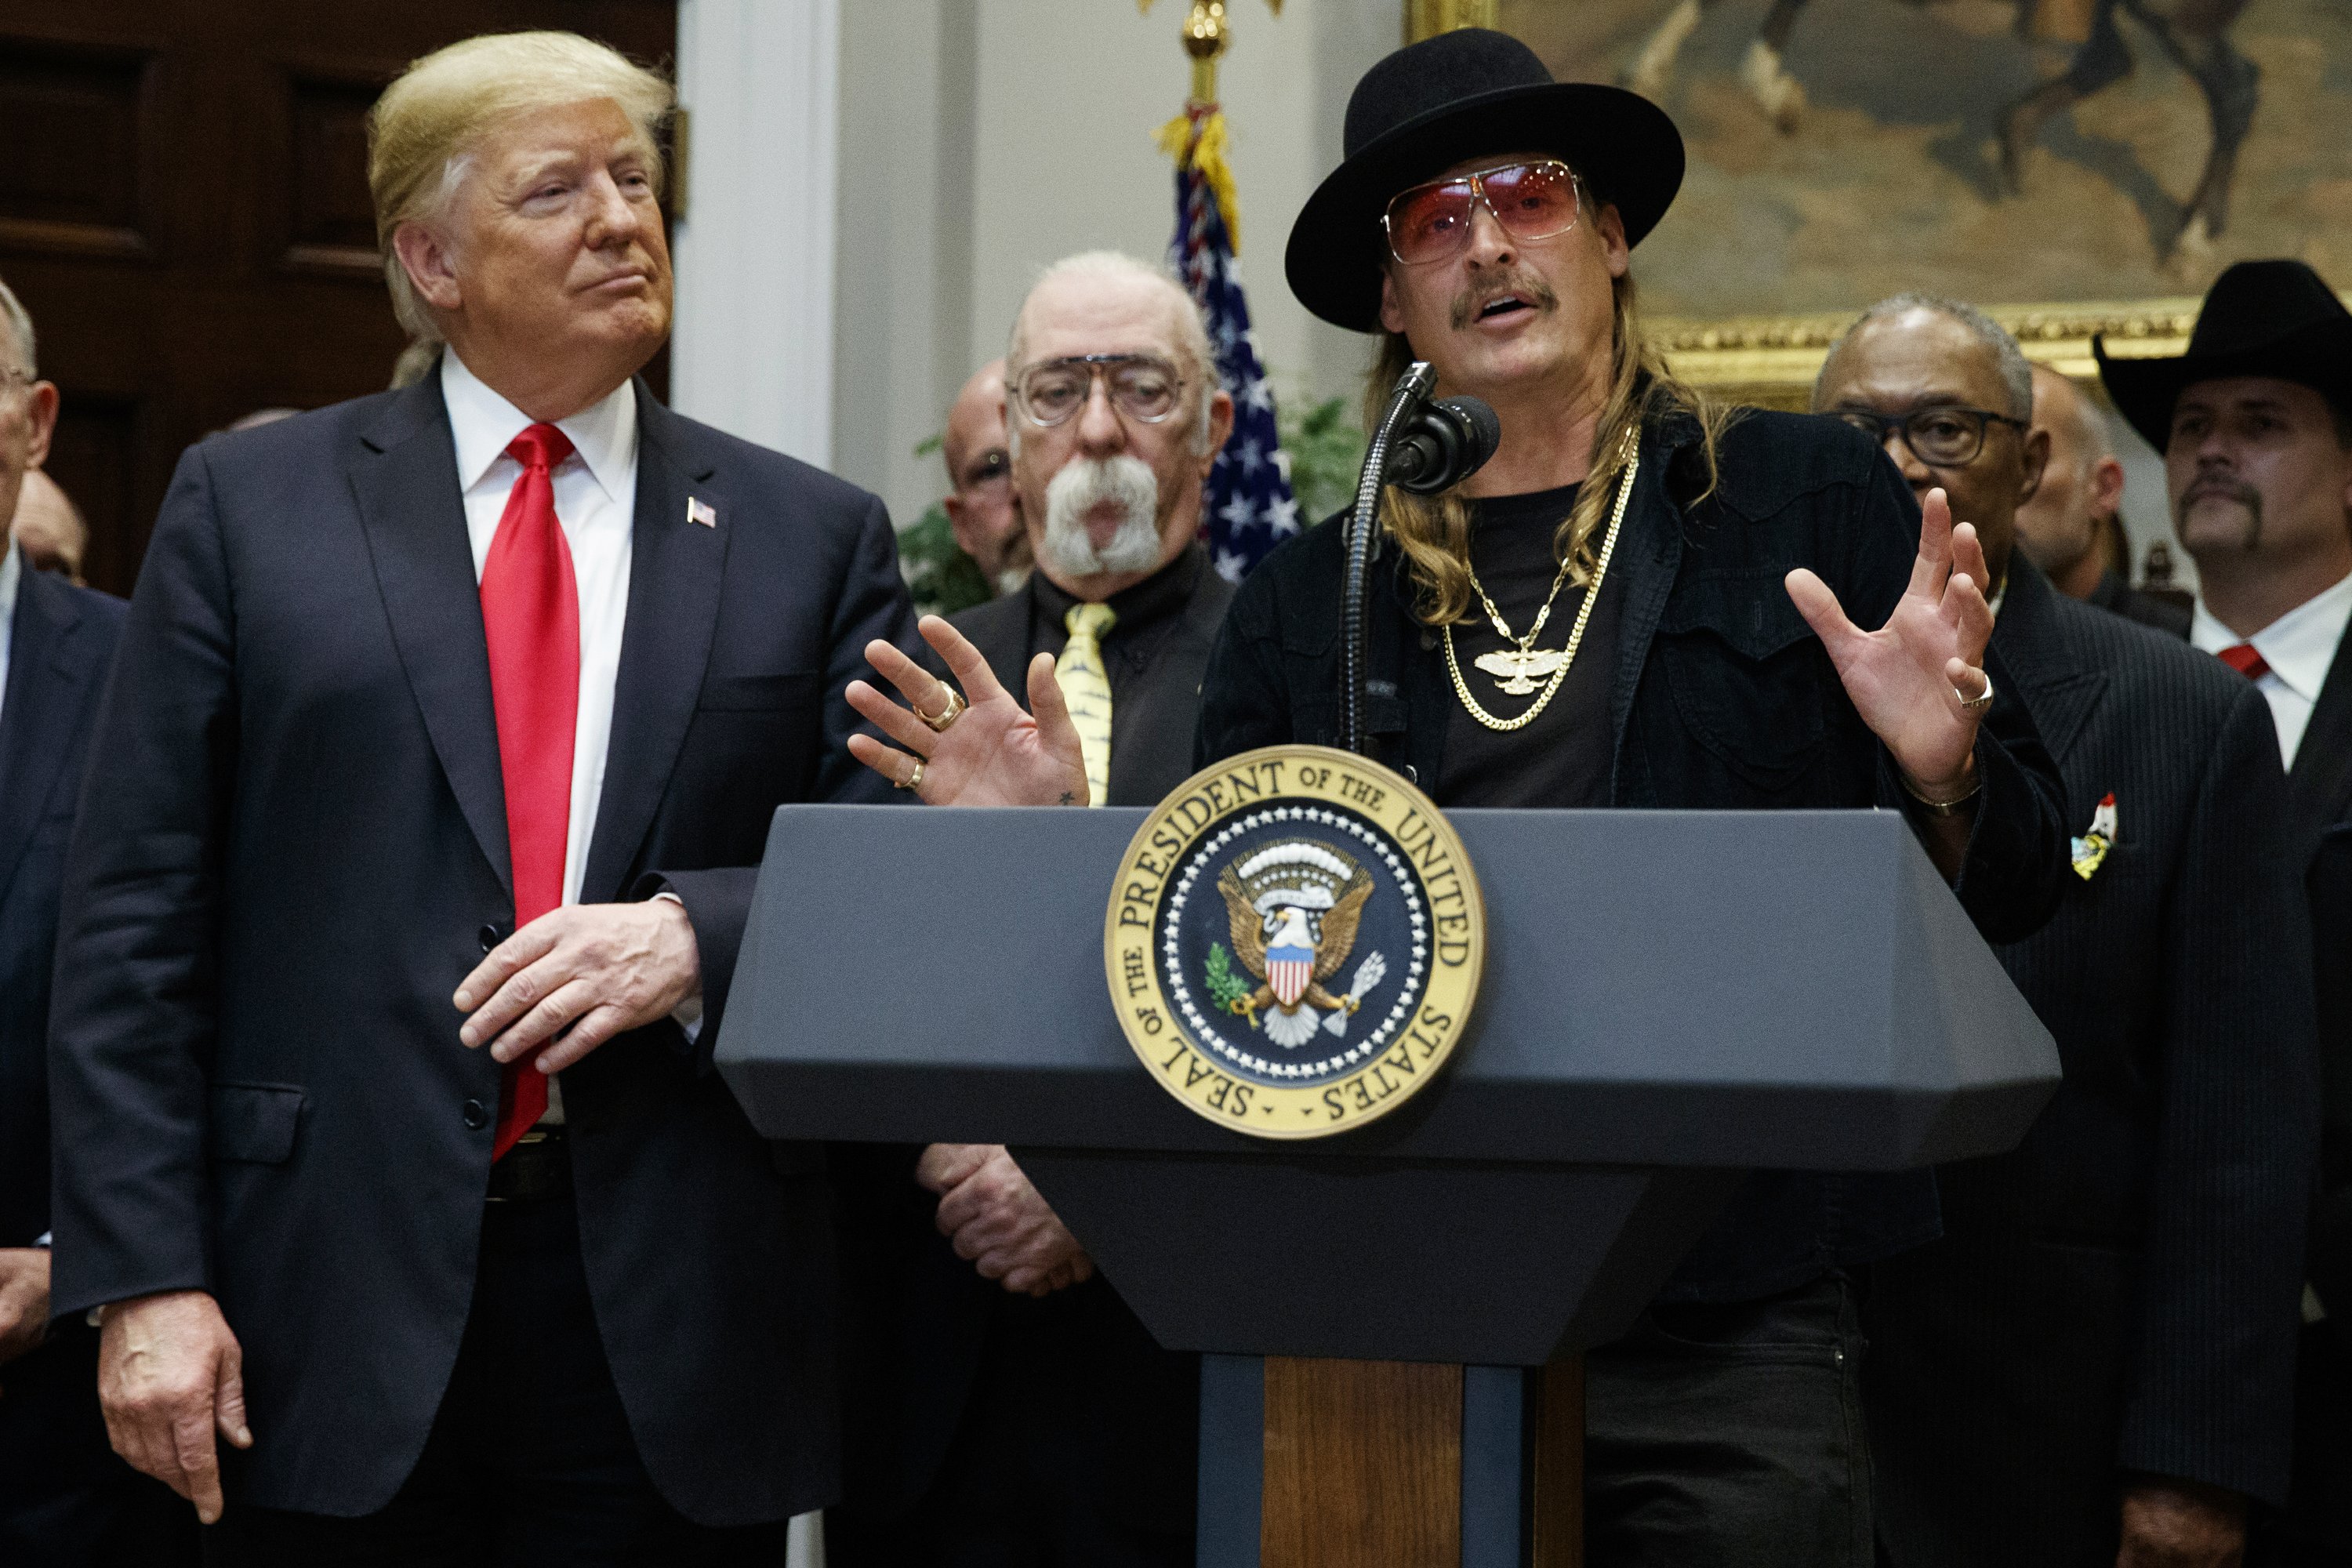 Kid Rock comes to White House as Trump signs royalty bill